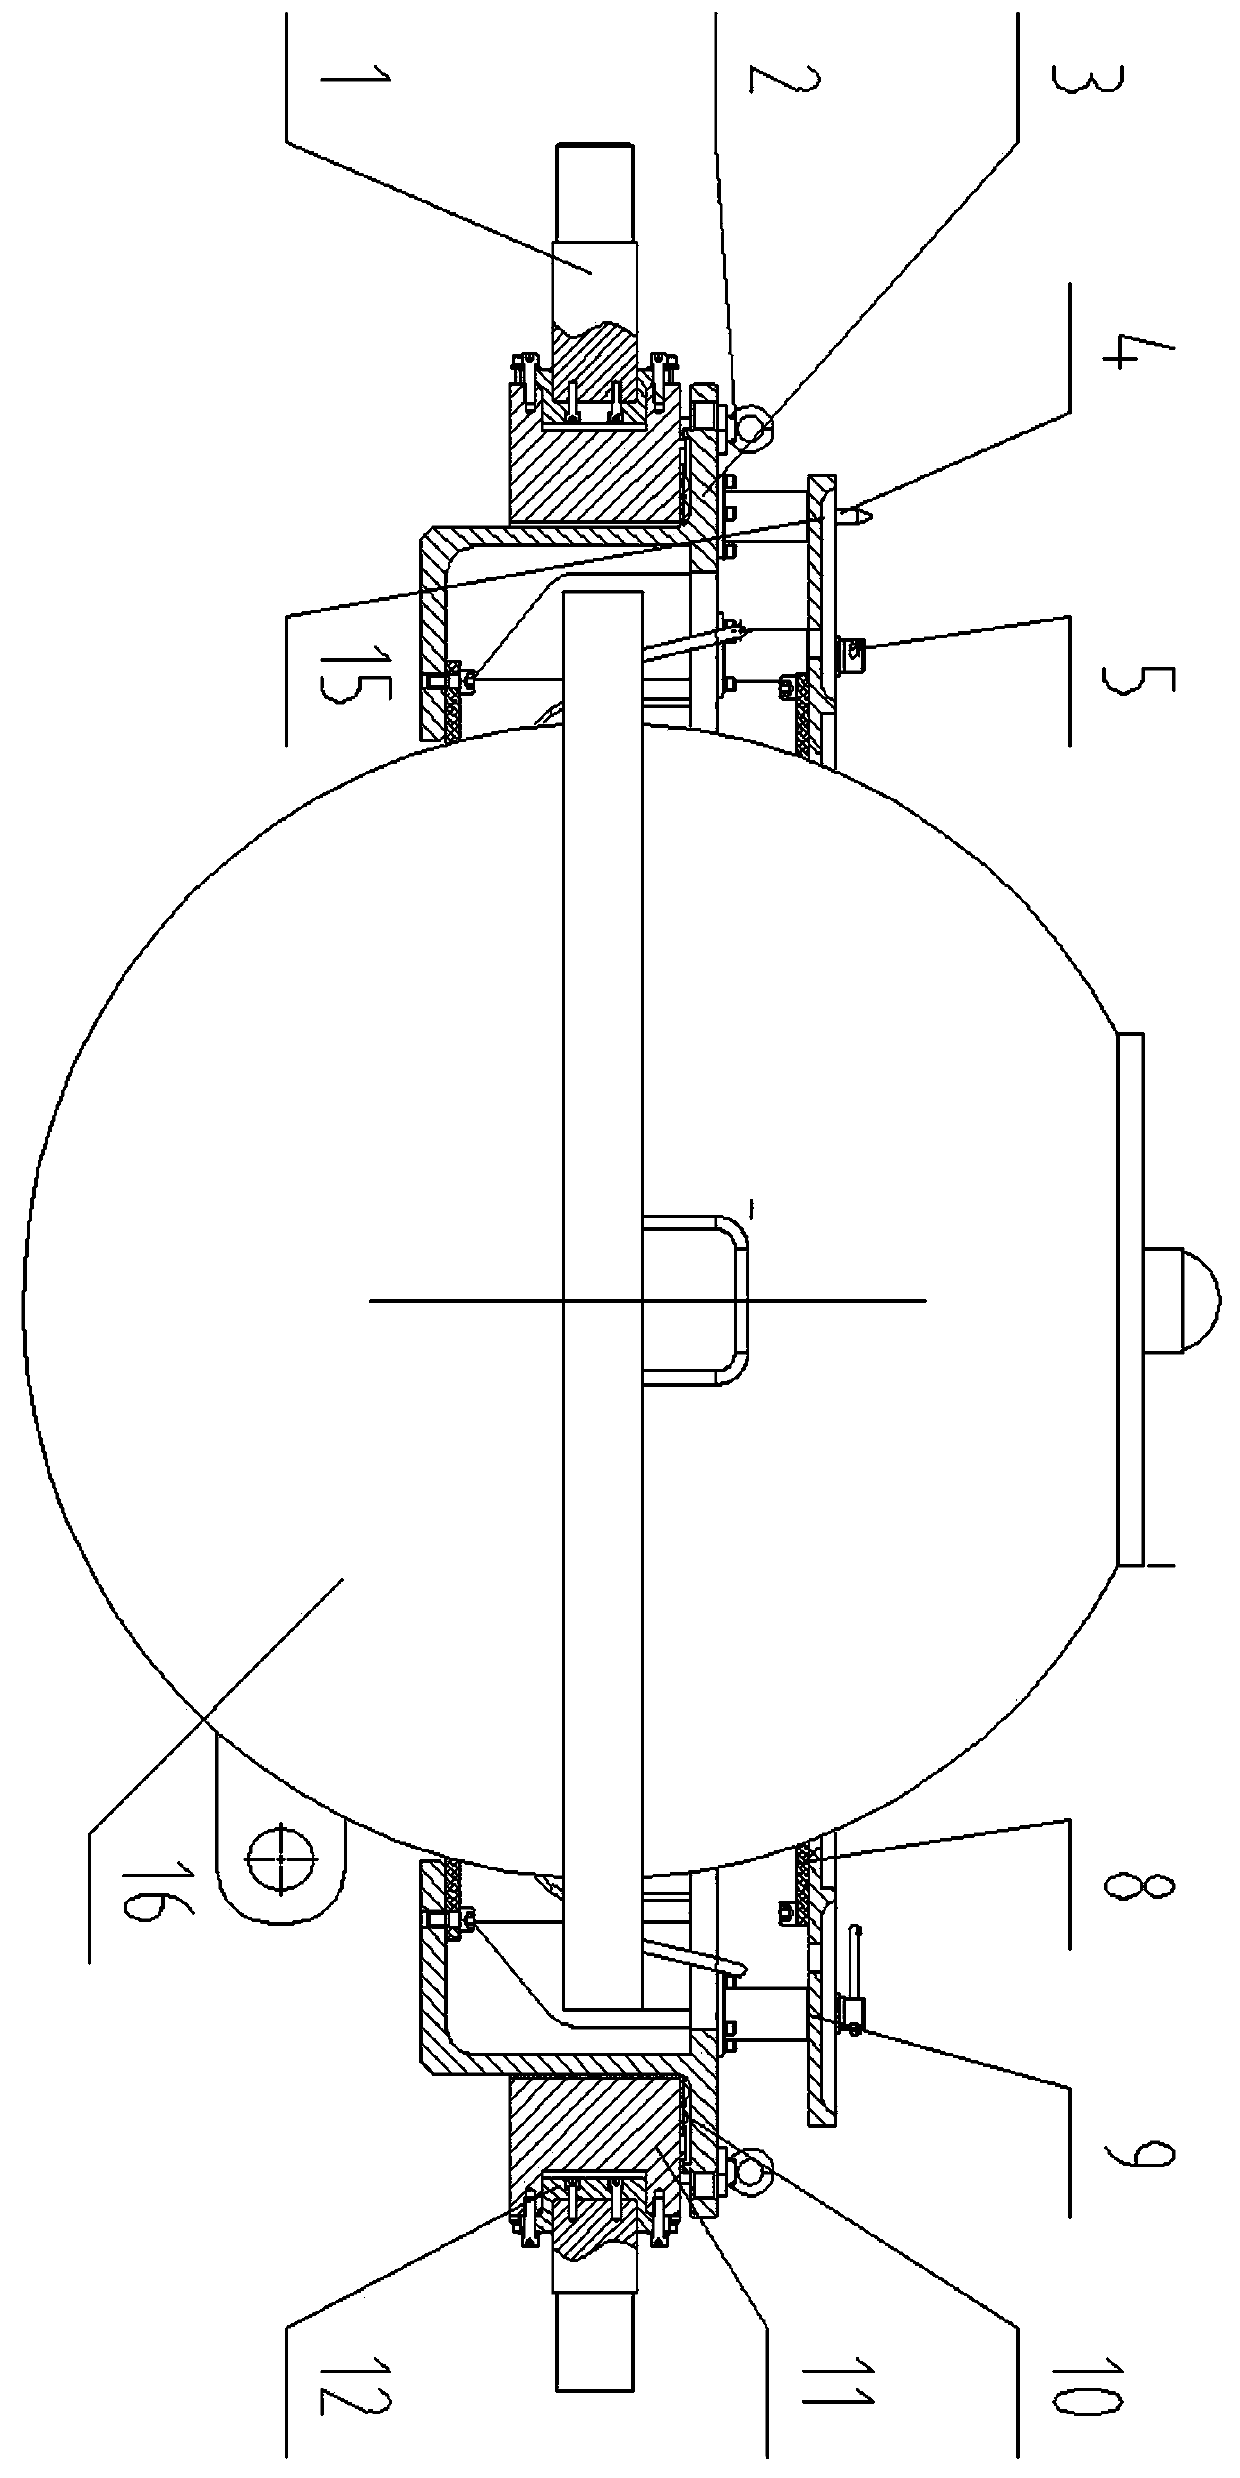 Specific stationary fixture for detecting wave buoy